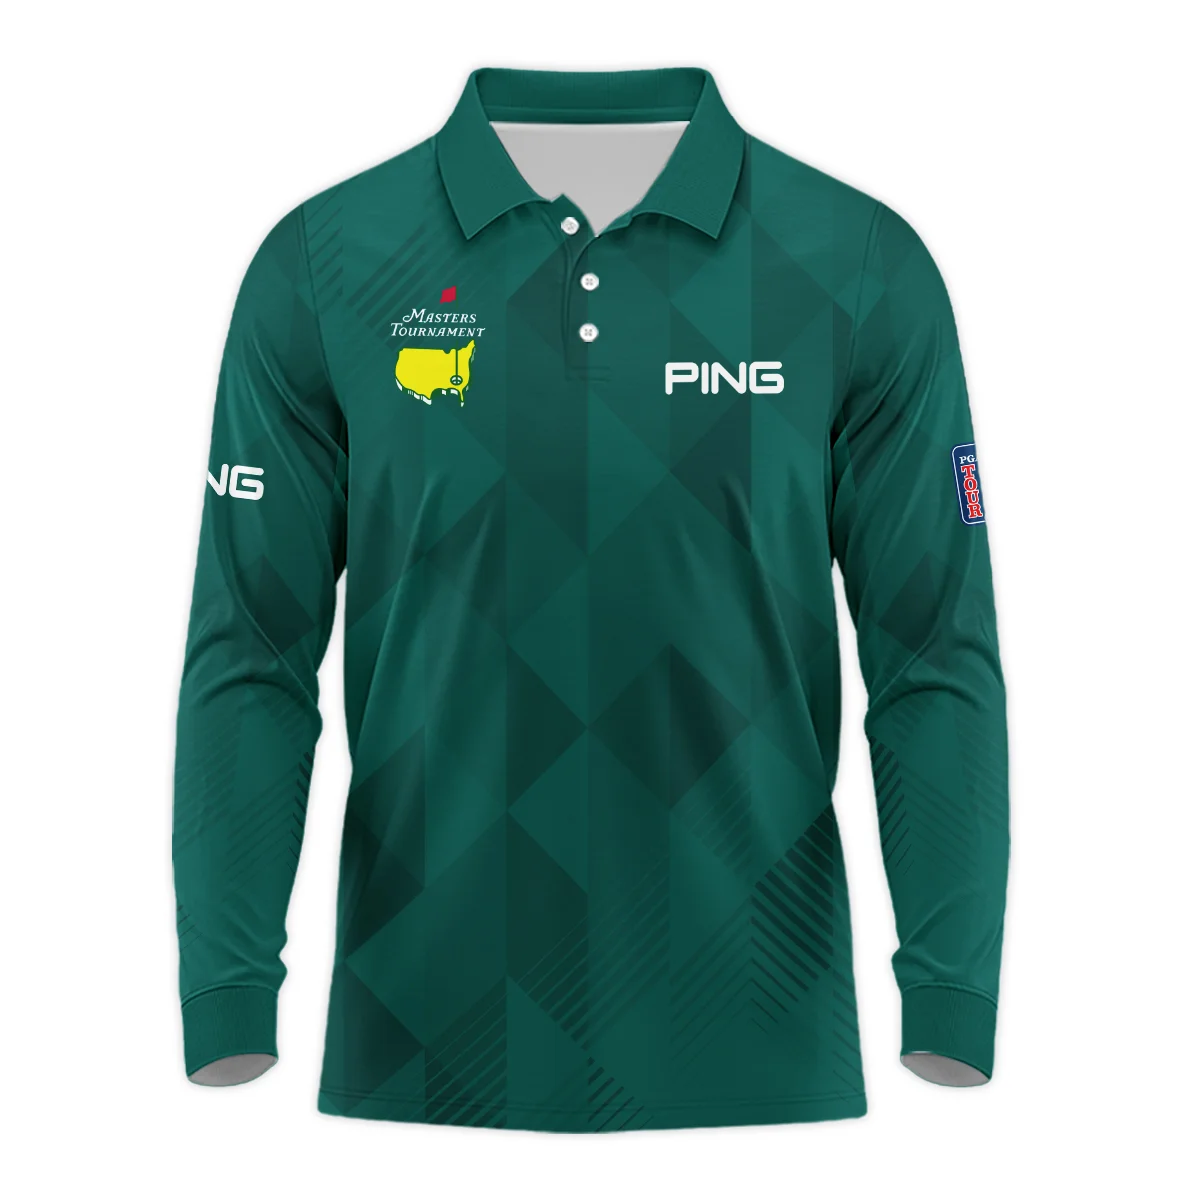 Masters Tournament Golf Sport Ping Polo Shirt Sports Triangle Abstract Green Polo Shirt For Men